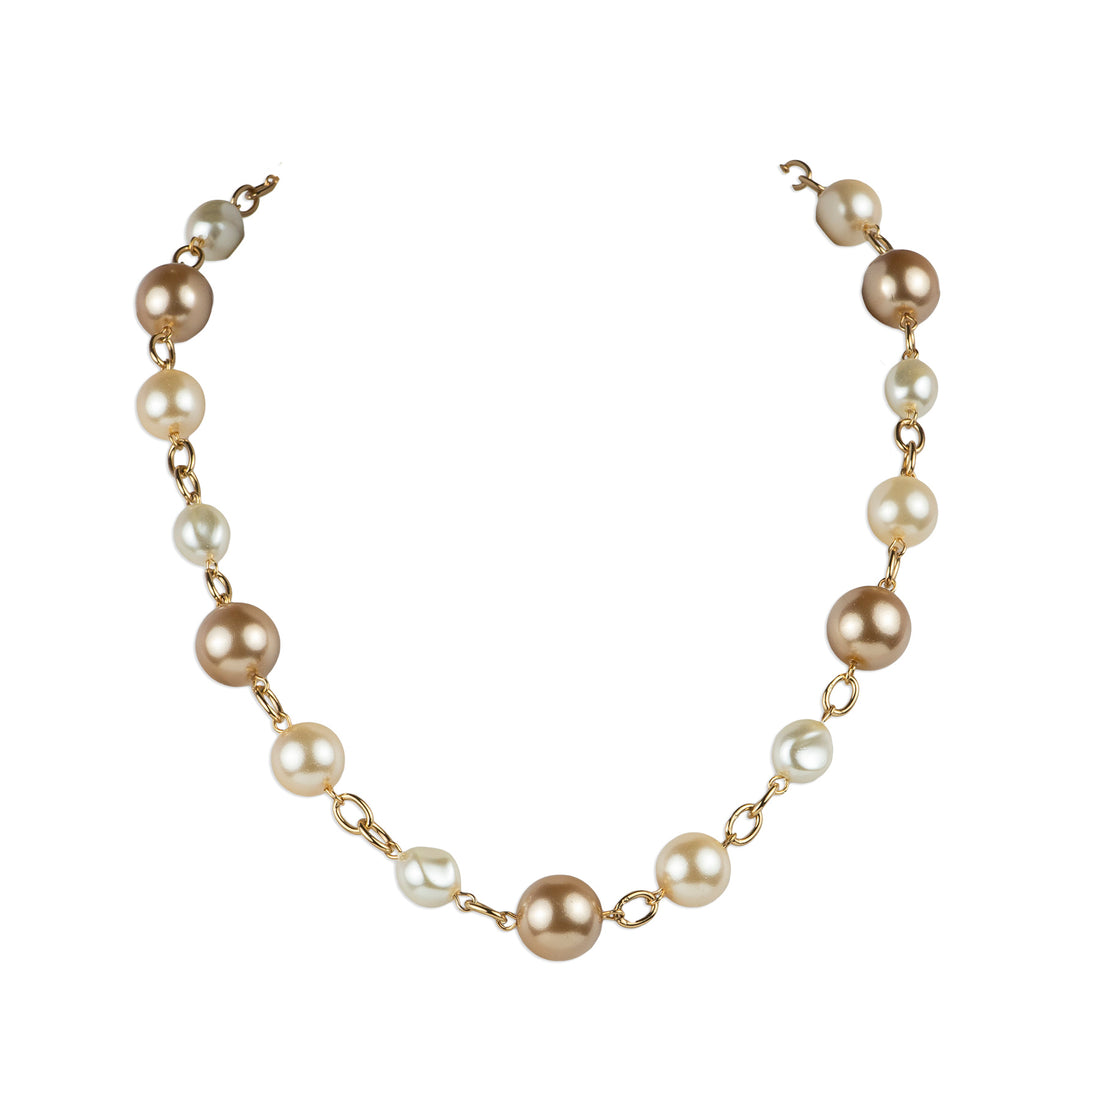 Pearl mix choker necklace